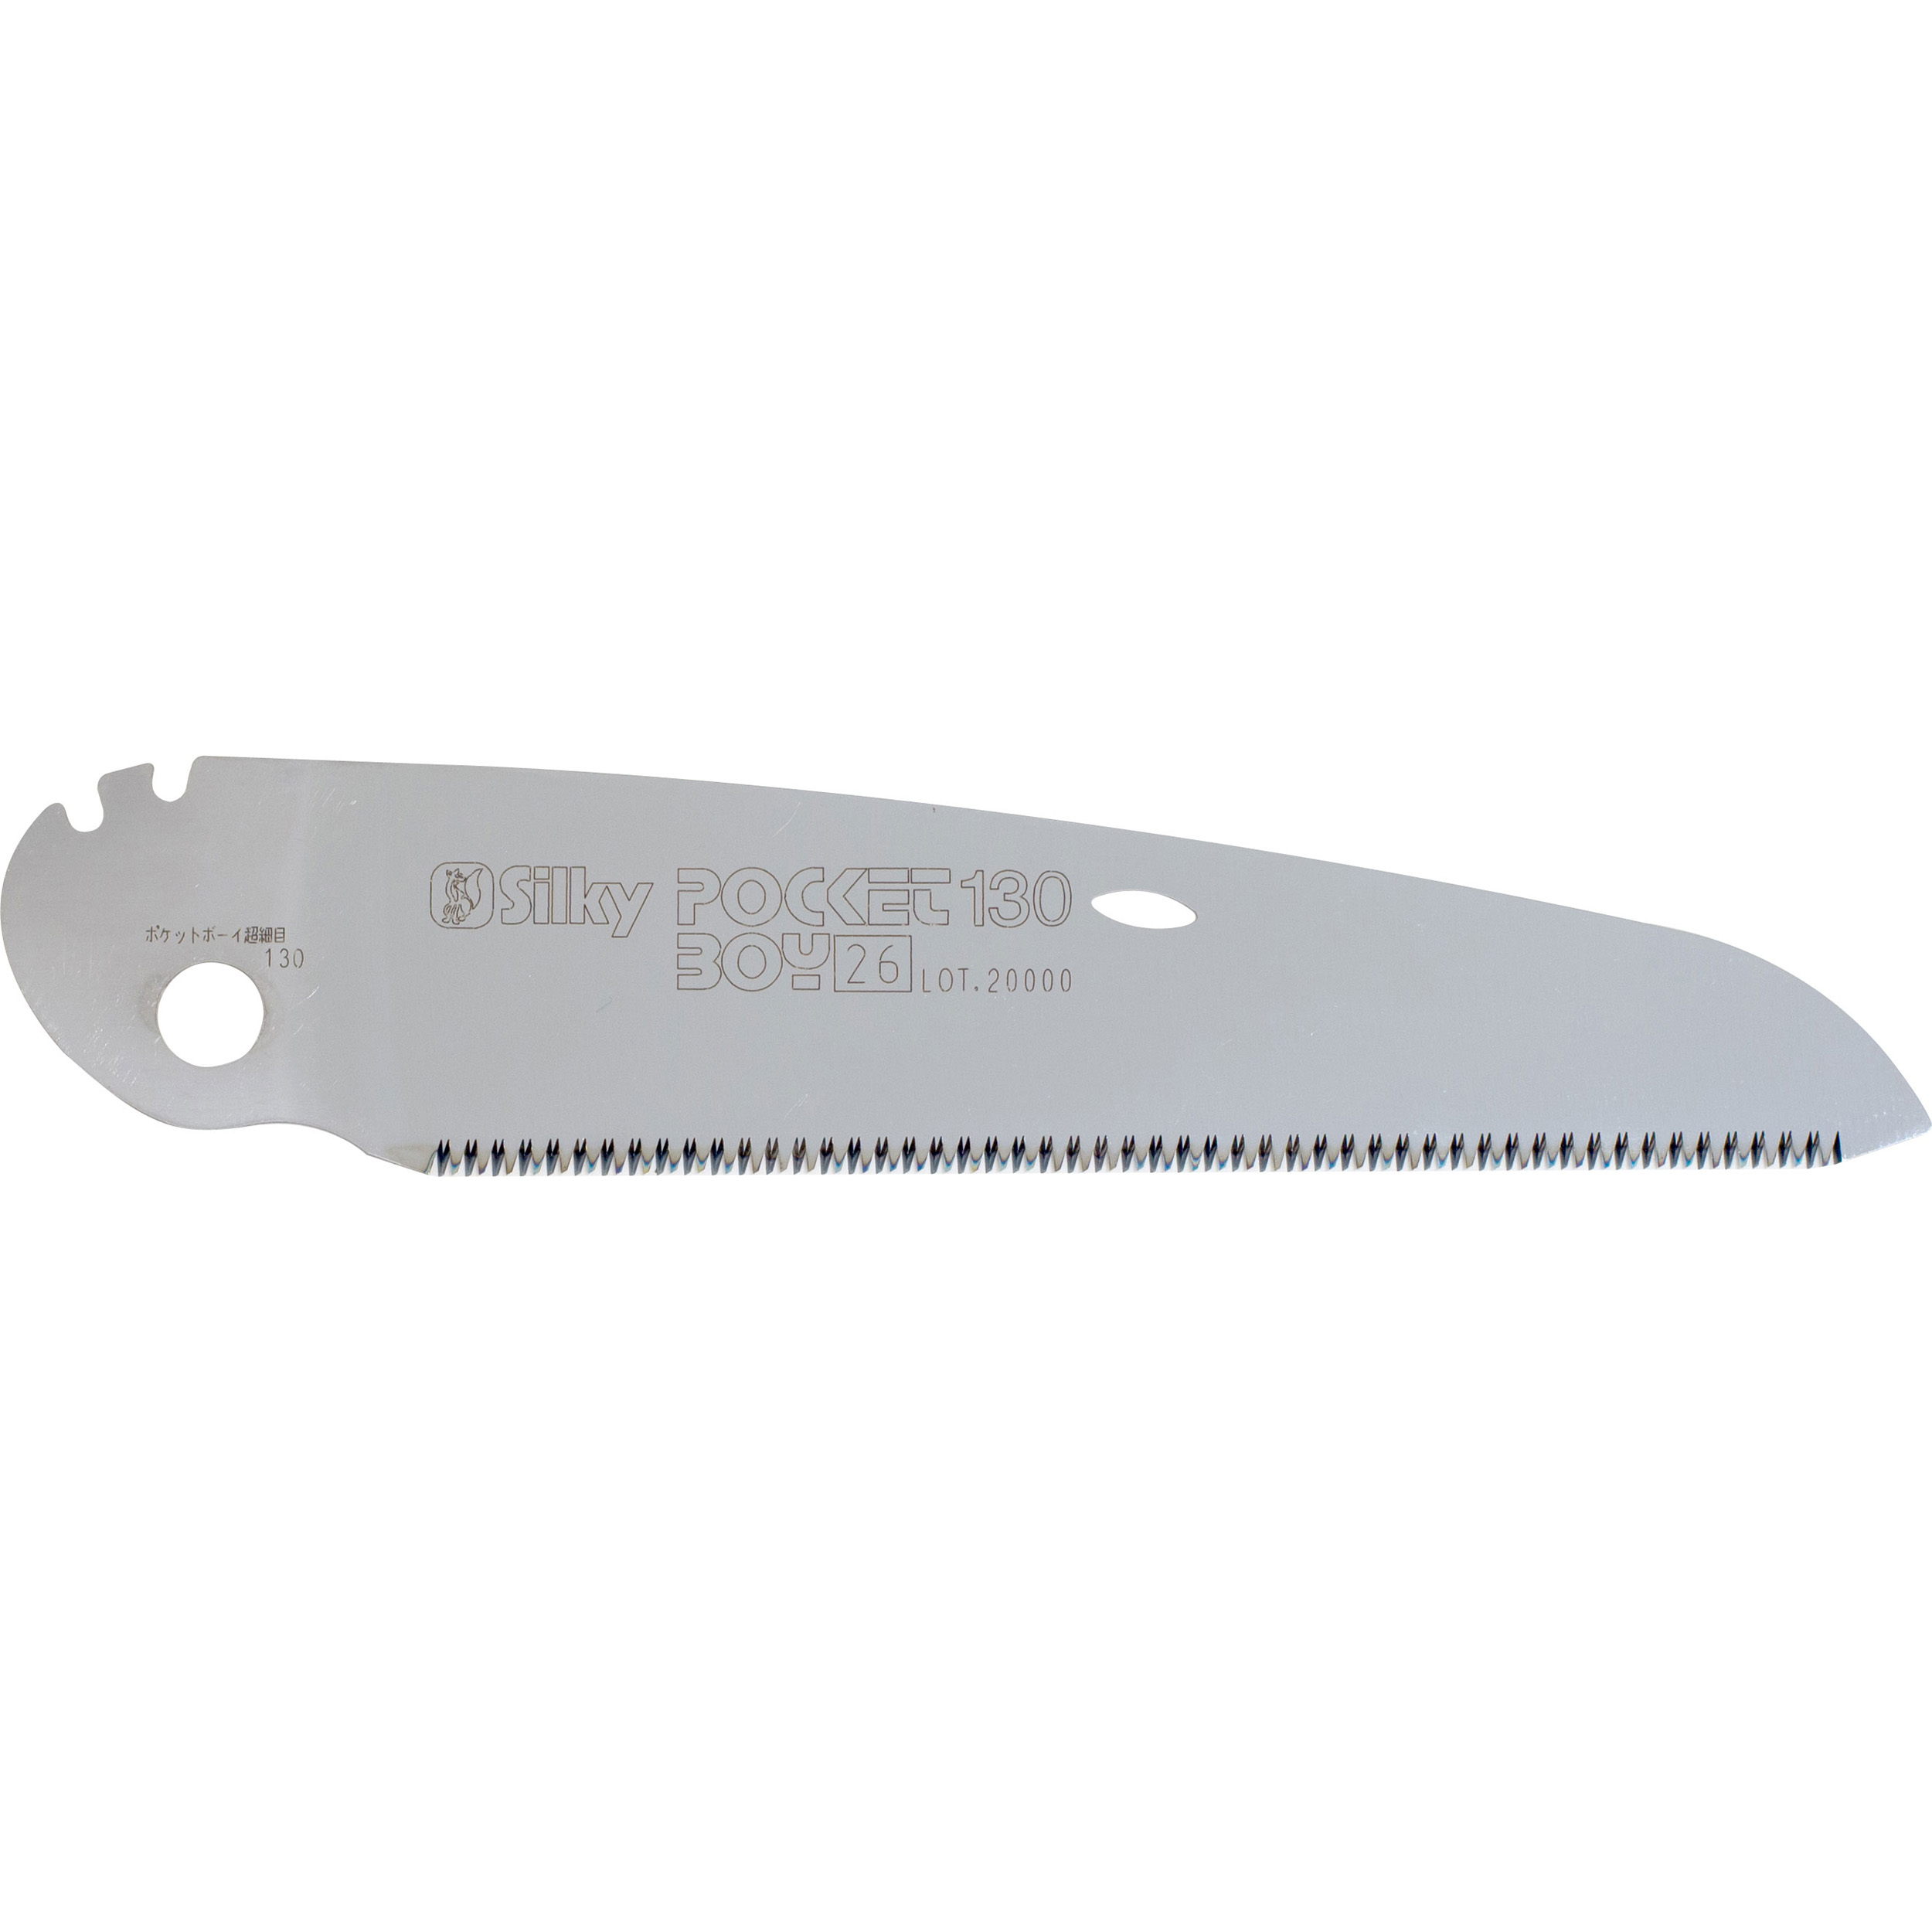 Pocketboy Replacement Blade, 130mm, Extra Fine Teeth